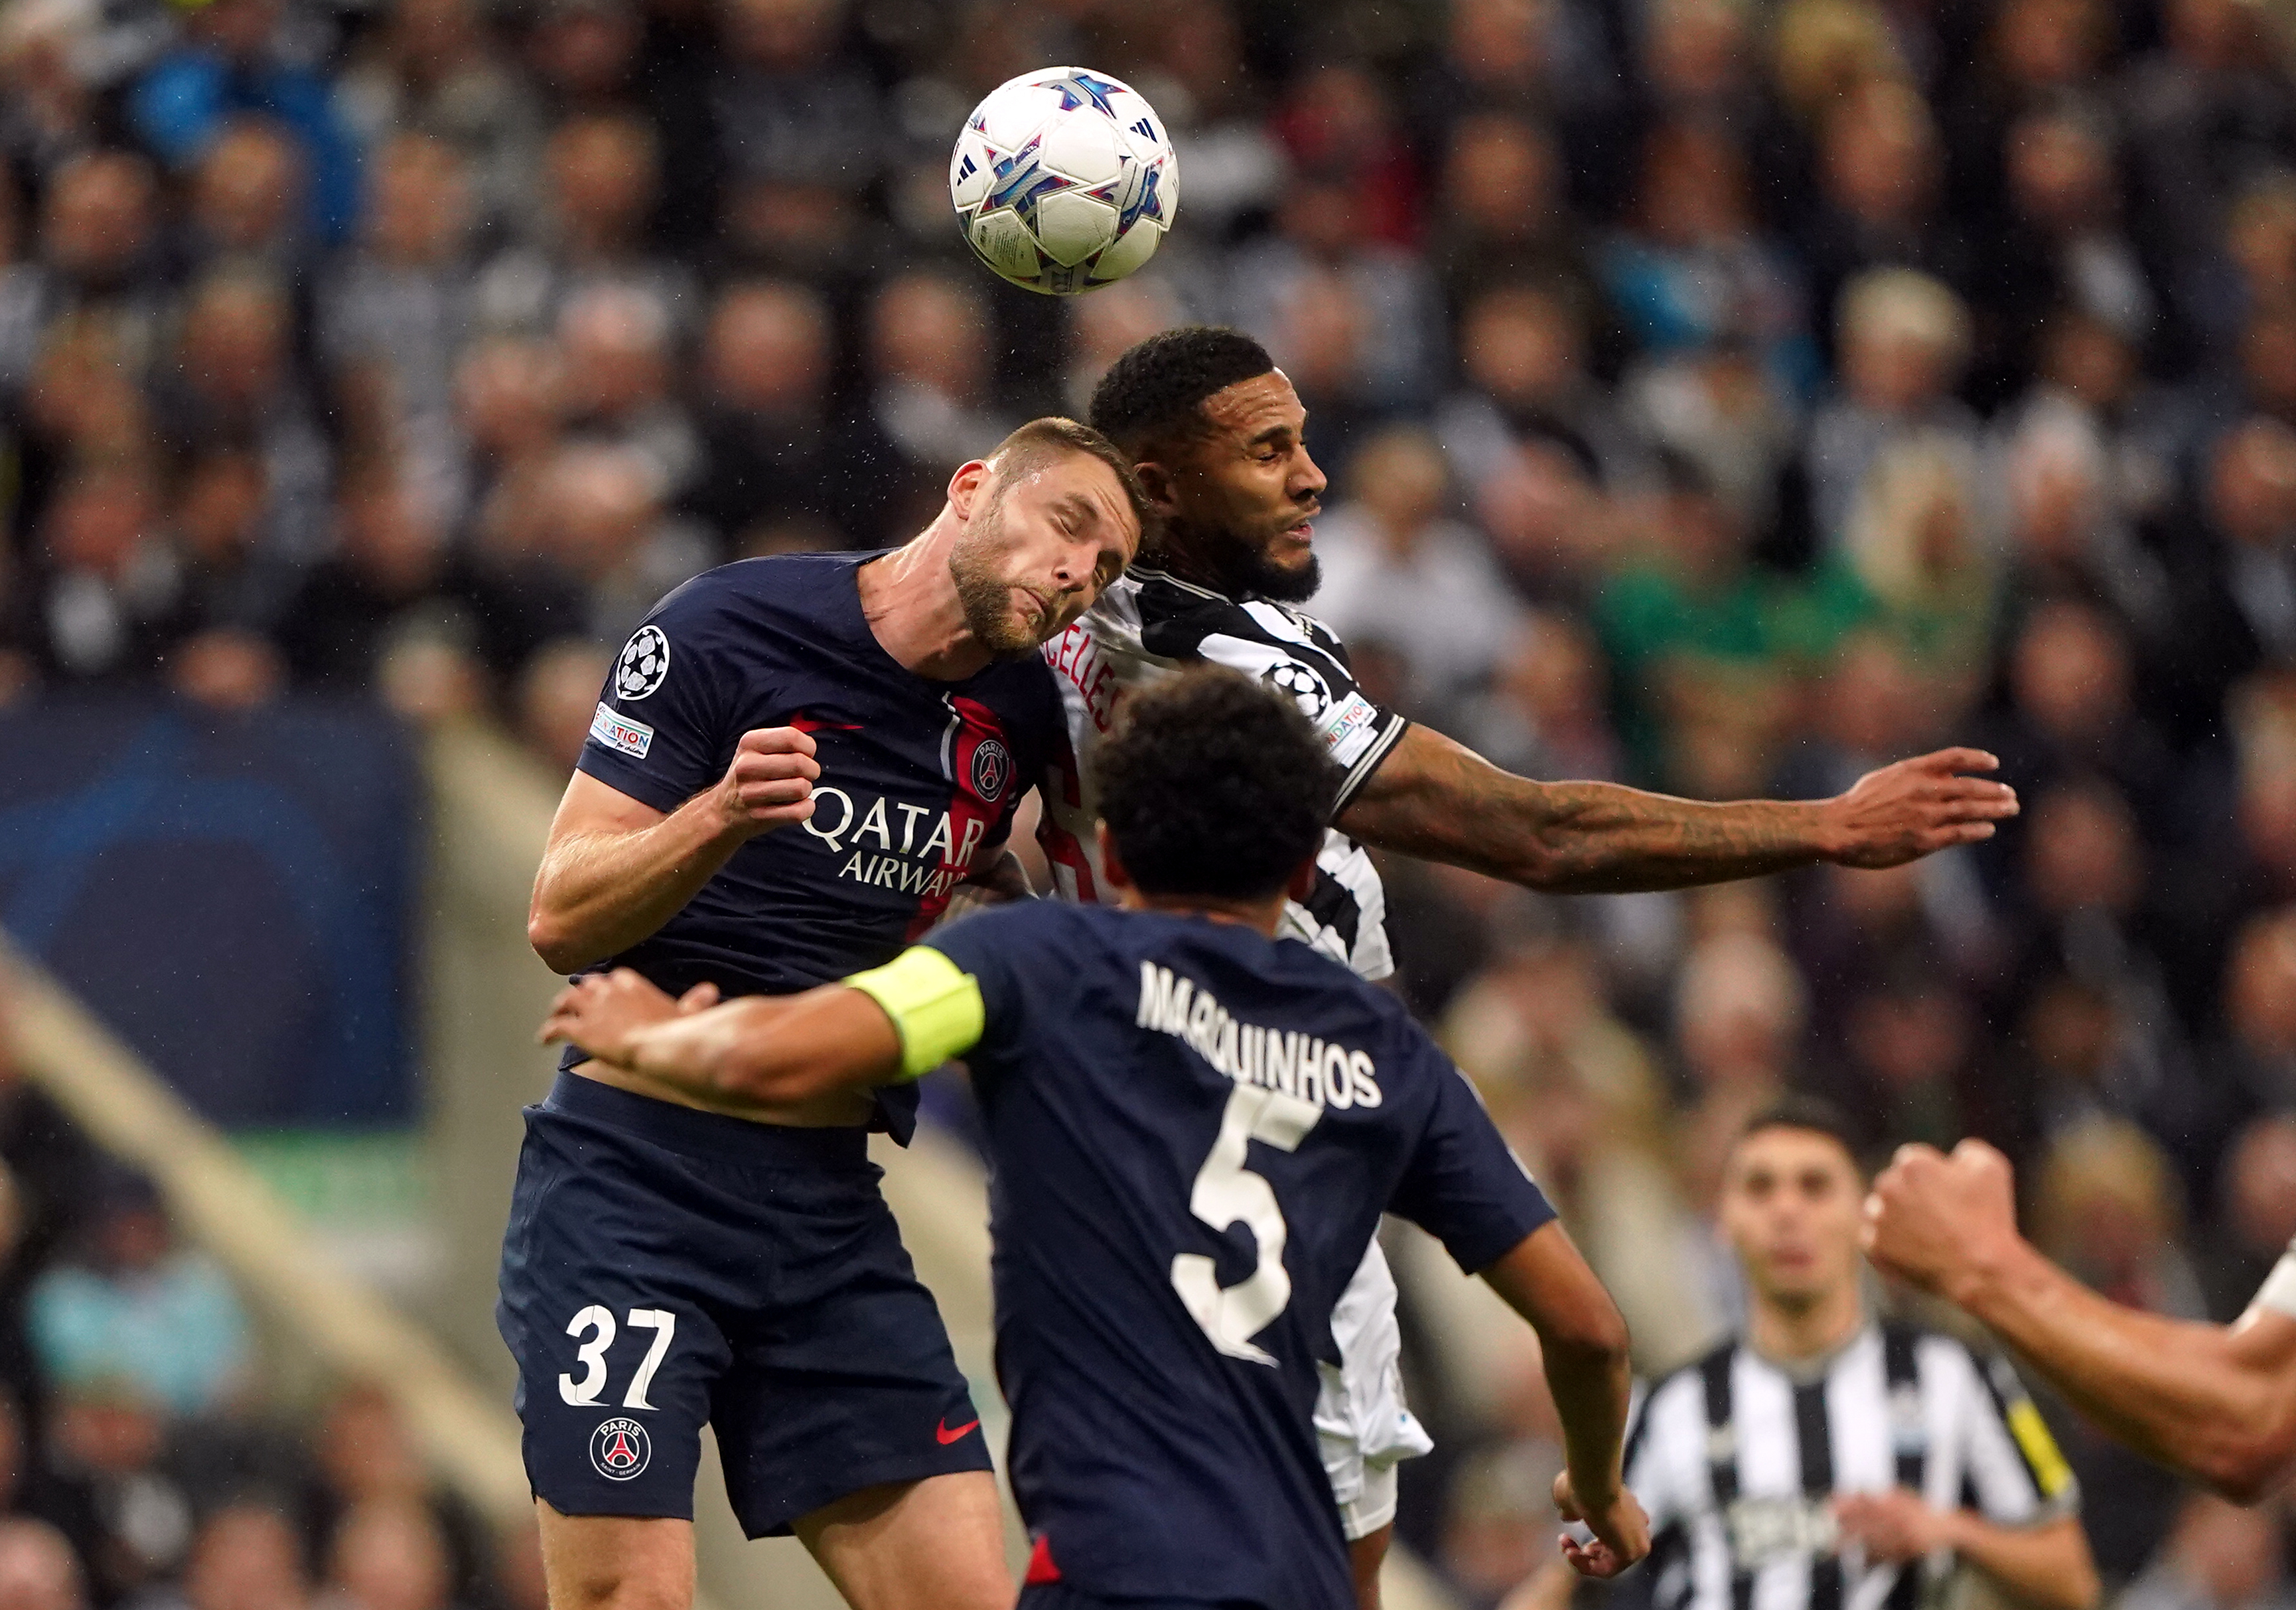 Newcastle defender Jamaal Lascelles has produced his best form for the cub in Sven Botman's absence